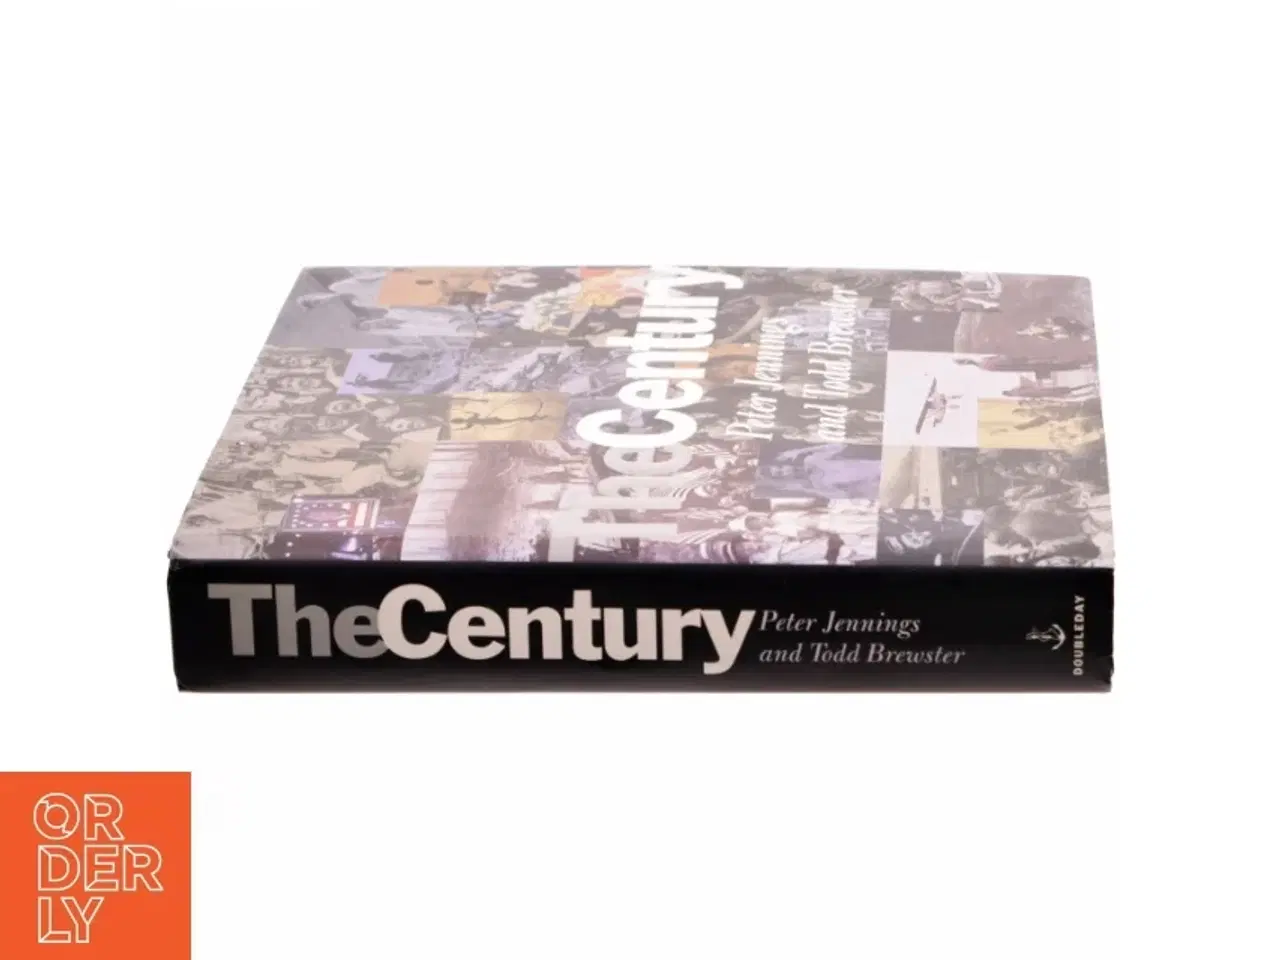 Billede 2 - The Century - The 20th Century in pictures and words af Peter Jennings and Todd Brewster (Bog)